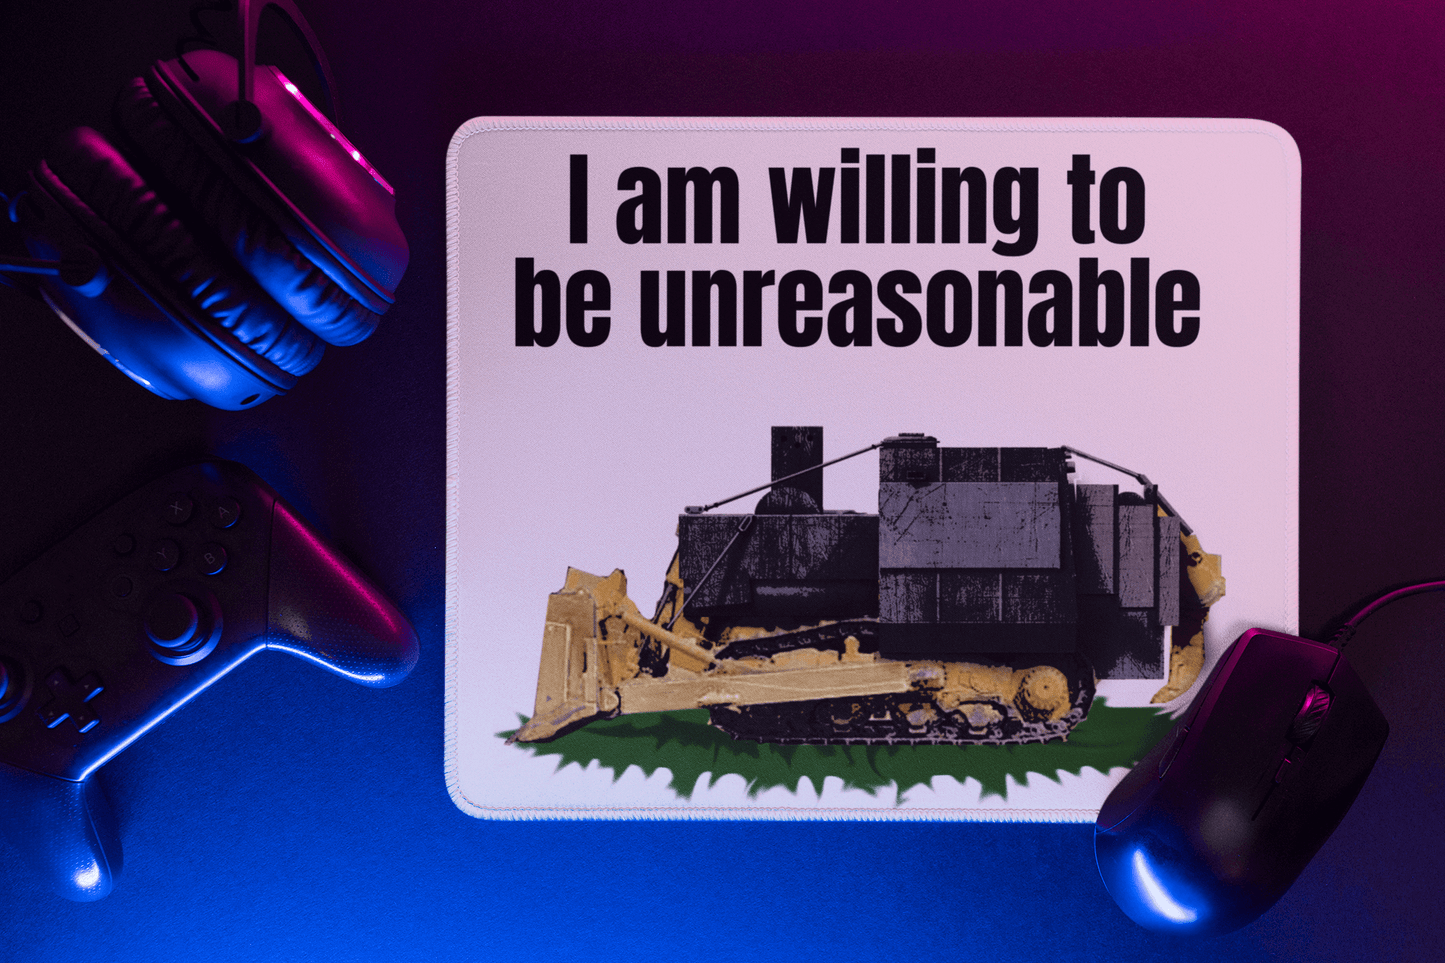 I am willing to be unreasonable  - Mouse pad